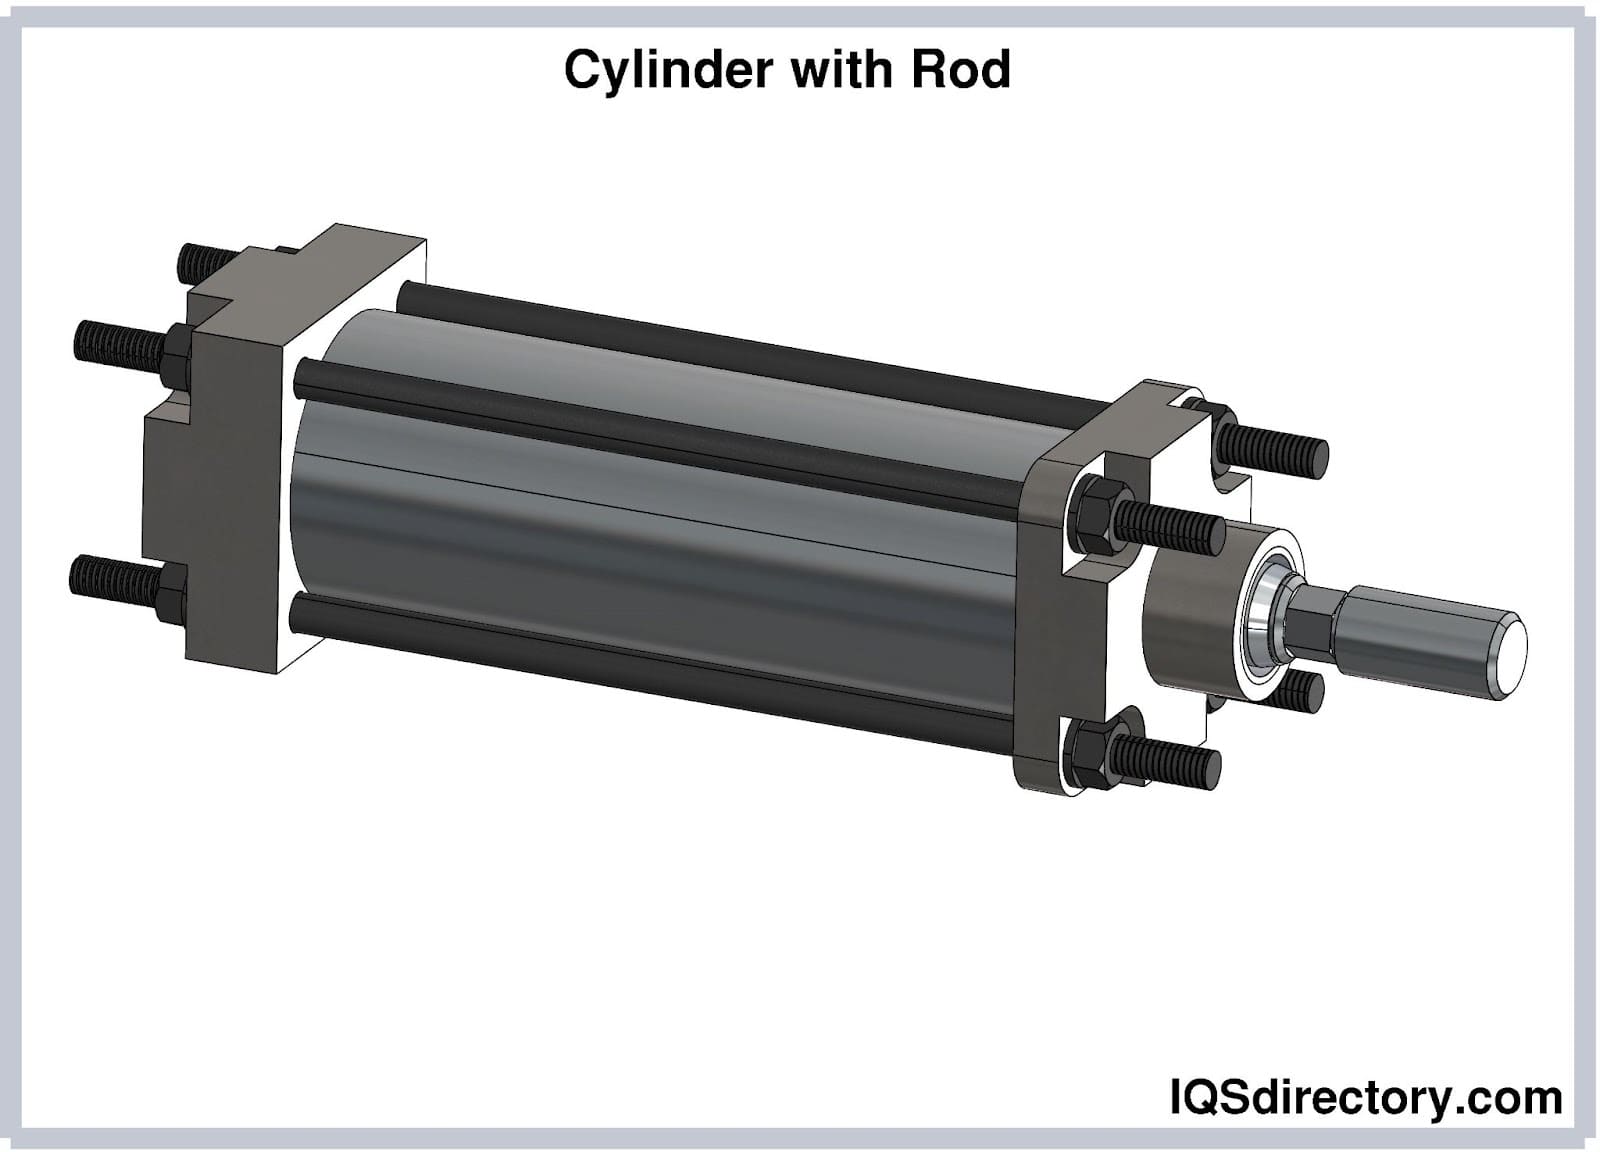 Cylinder with Rod